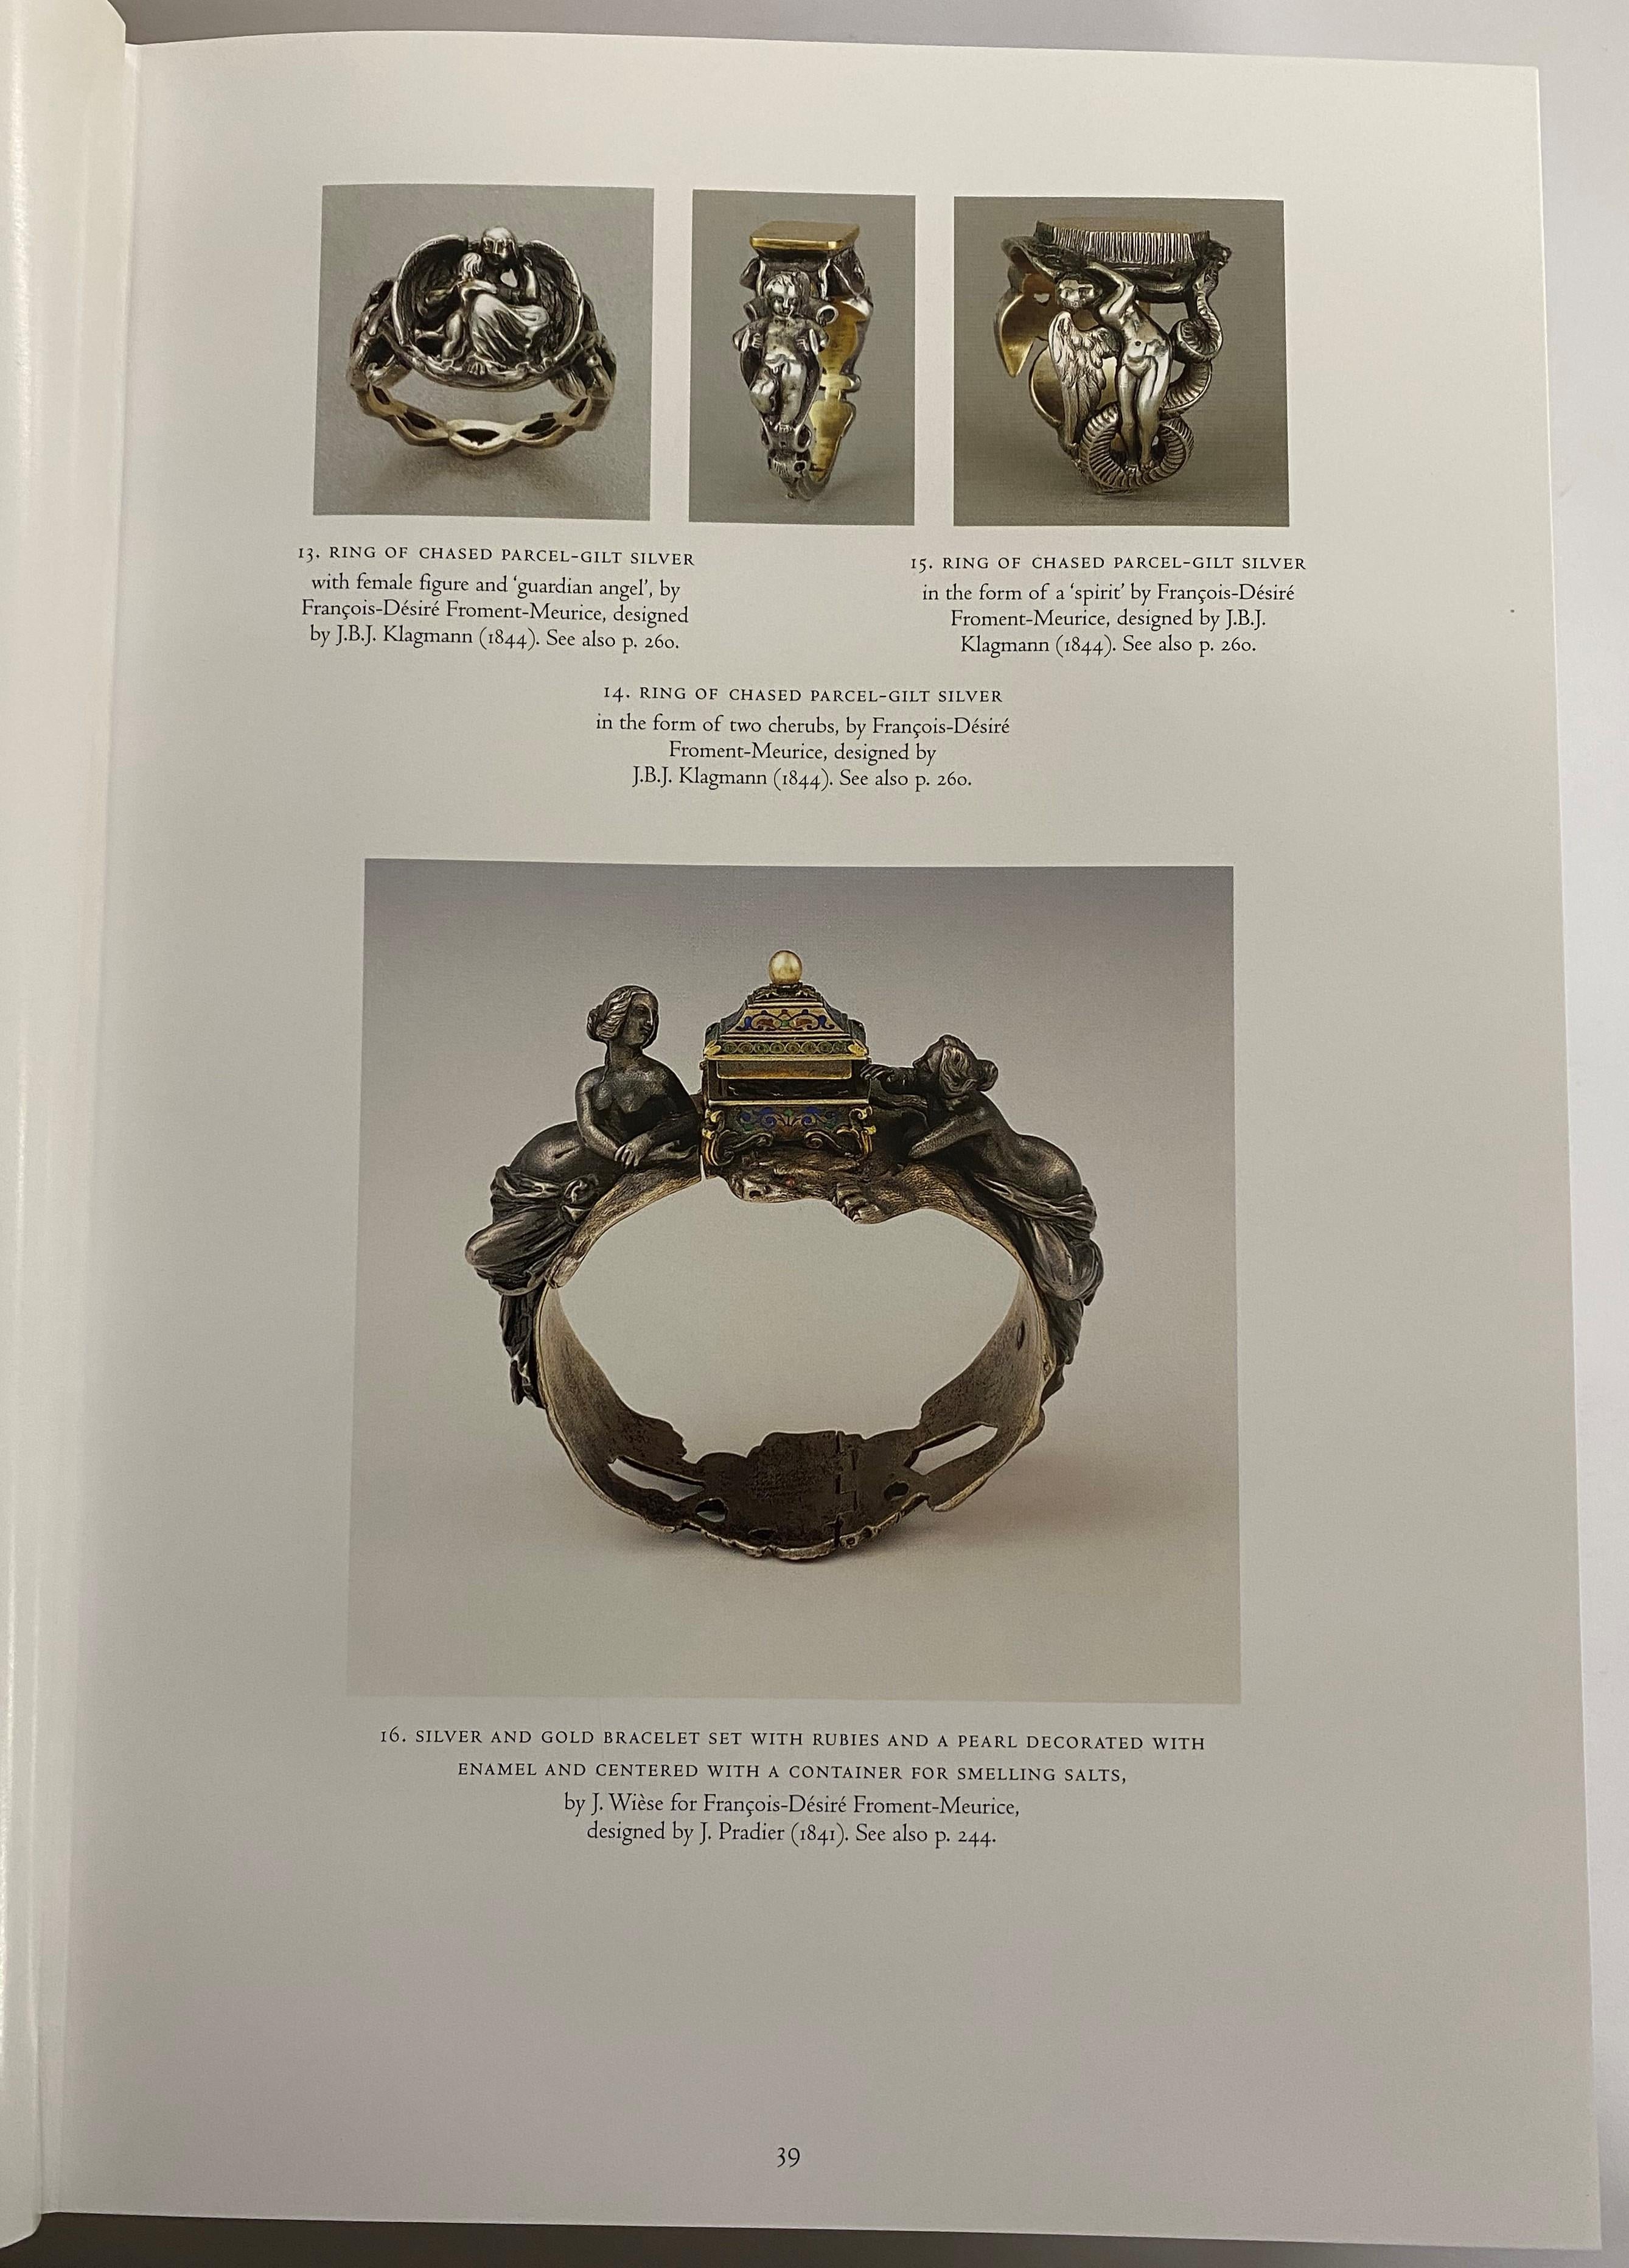 Vever’s La Bijouterie Française au XIXem Siècle was first published in France between 1906–08: it has been the bible of all jewelry experts, buyers, sellers, scholars and historians ever since. Only 1,000 copies were originally produced, and it has